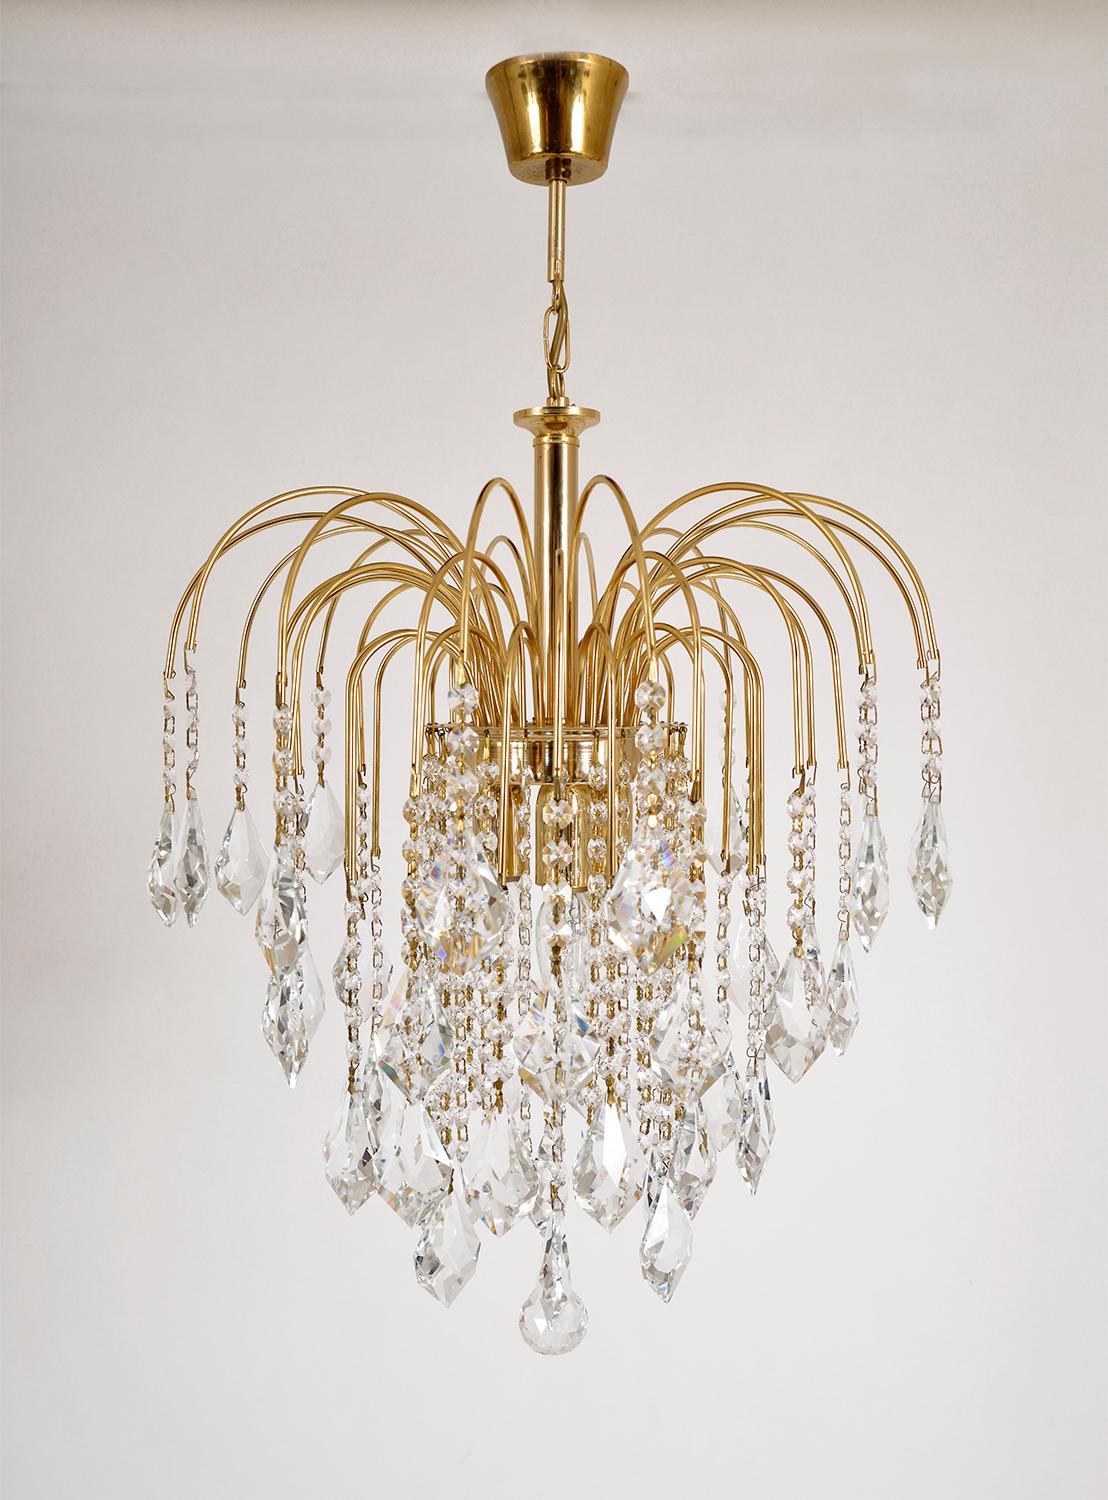 This vintage Italian waterfall chandelier features a gilt brass frame with multiple tiers, which teems with strands of sparkling cut crystal, topped off with elegant diamond faceted teardrop crystals and a crystal ball. 
Three bulbs illuminate the